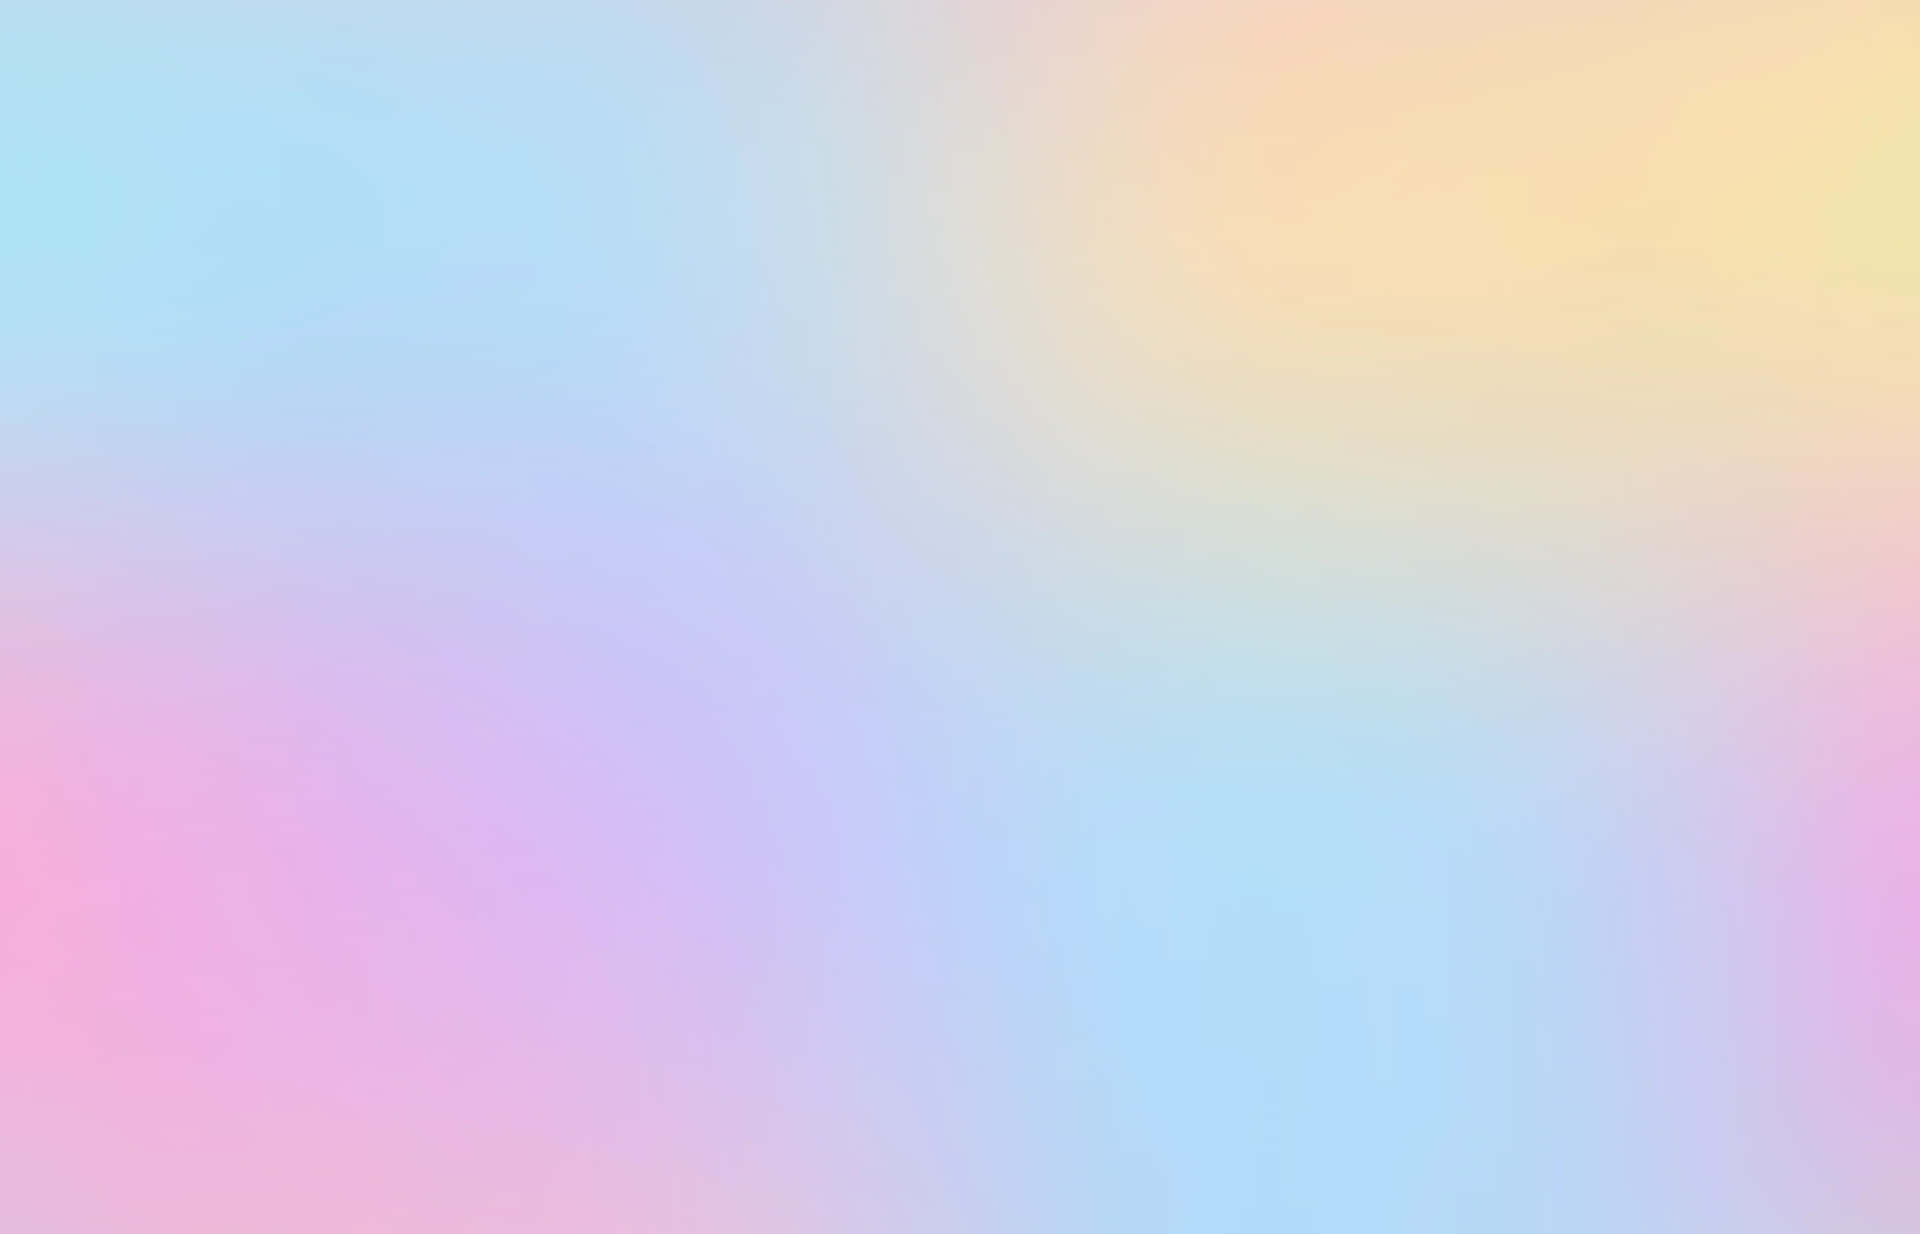 pink and grey gradient background